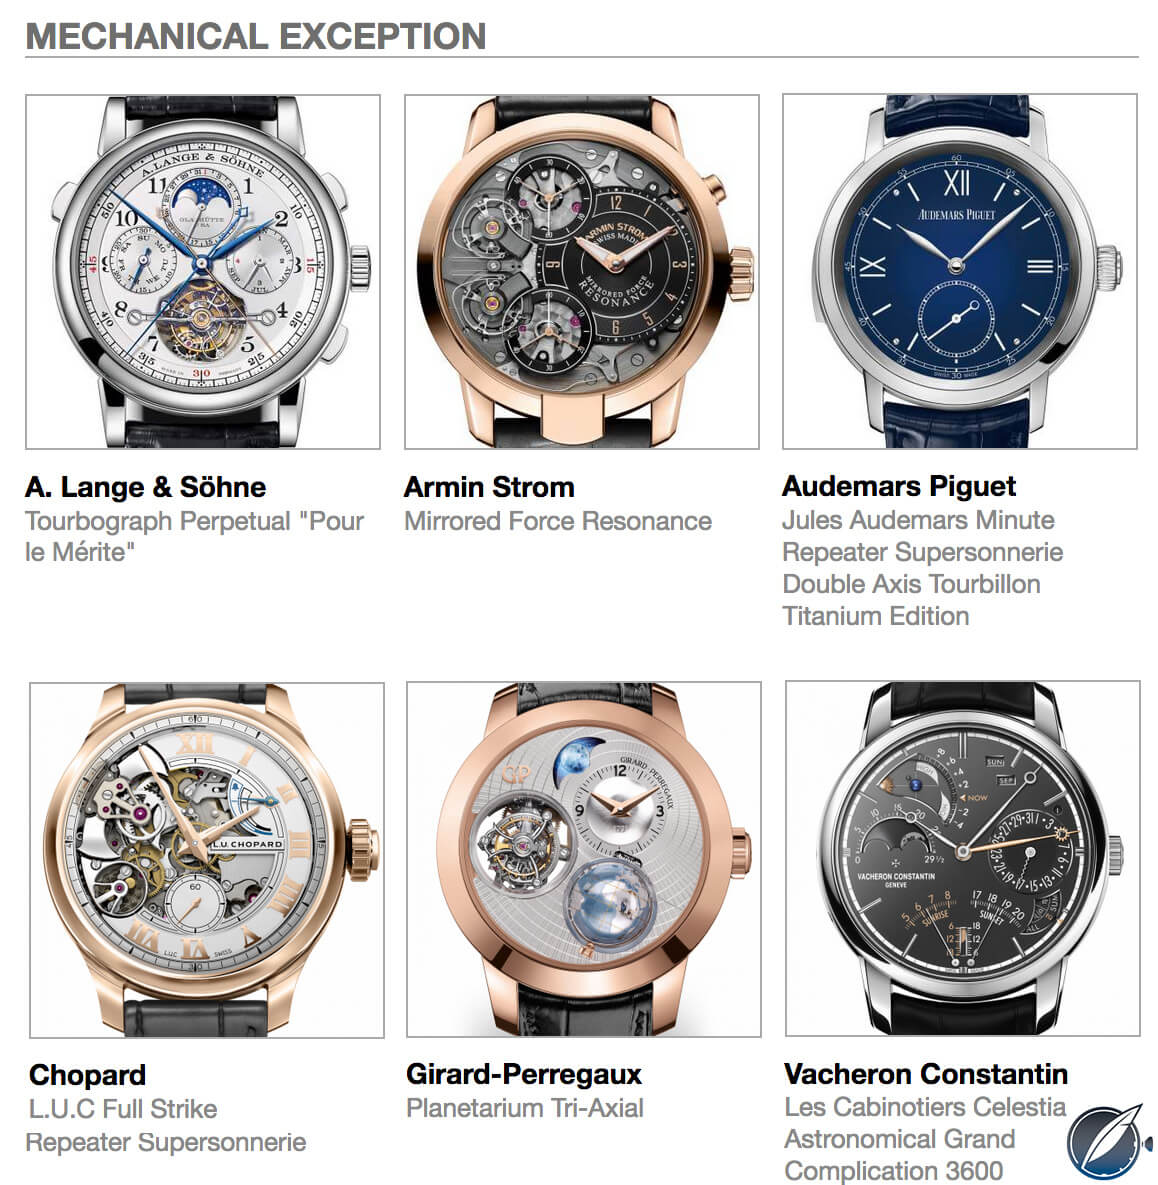 pre-selected Mechanical Exception watches for the 2017 GPHG are clockwise from top left above: A. Lange & Söhne, Tourbograph Perpetual Pour le Mérite, Armin Strom Mirrored Force Resonance, Audemars Piguet Jules Audemars Minute Repeater Supersonnerie, Chopard L.U.C Full Strike, Girard-Perregaux Planetarium Tri-Axial, and Vacheron Constantin Les Cabinotiers Celestia Astronomical Grand Complication 3600.